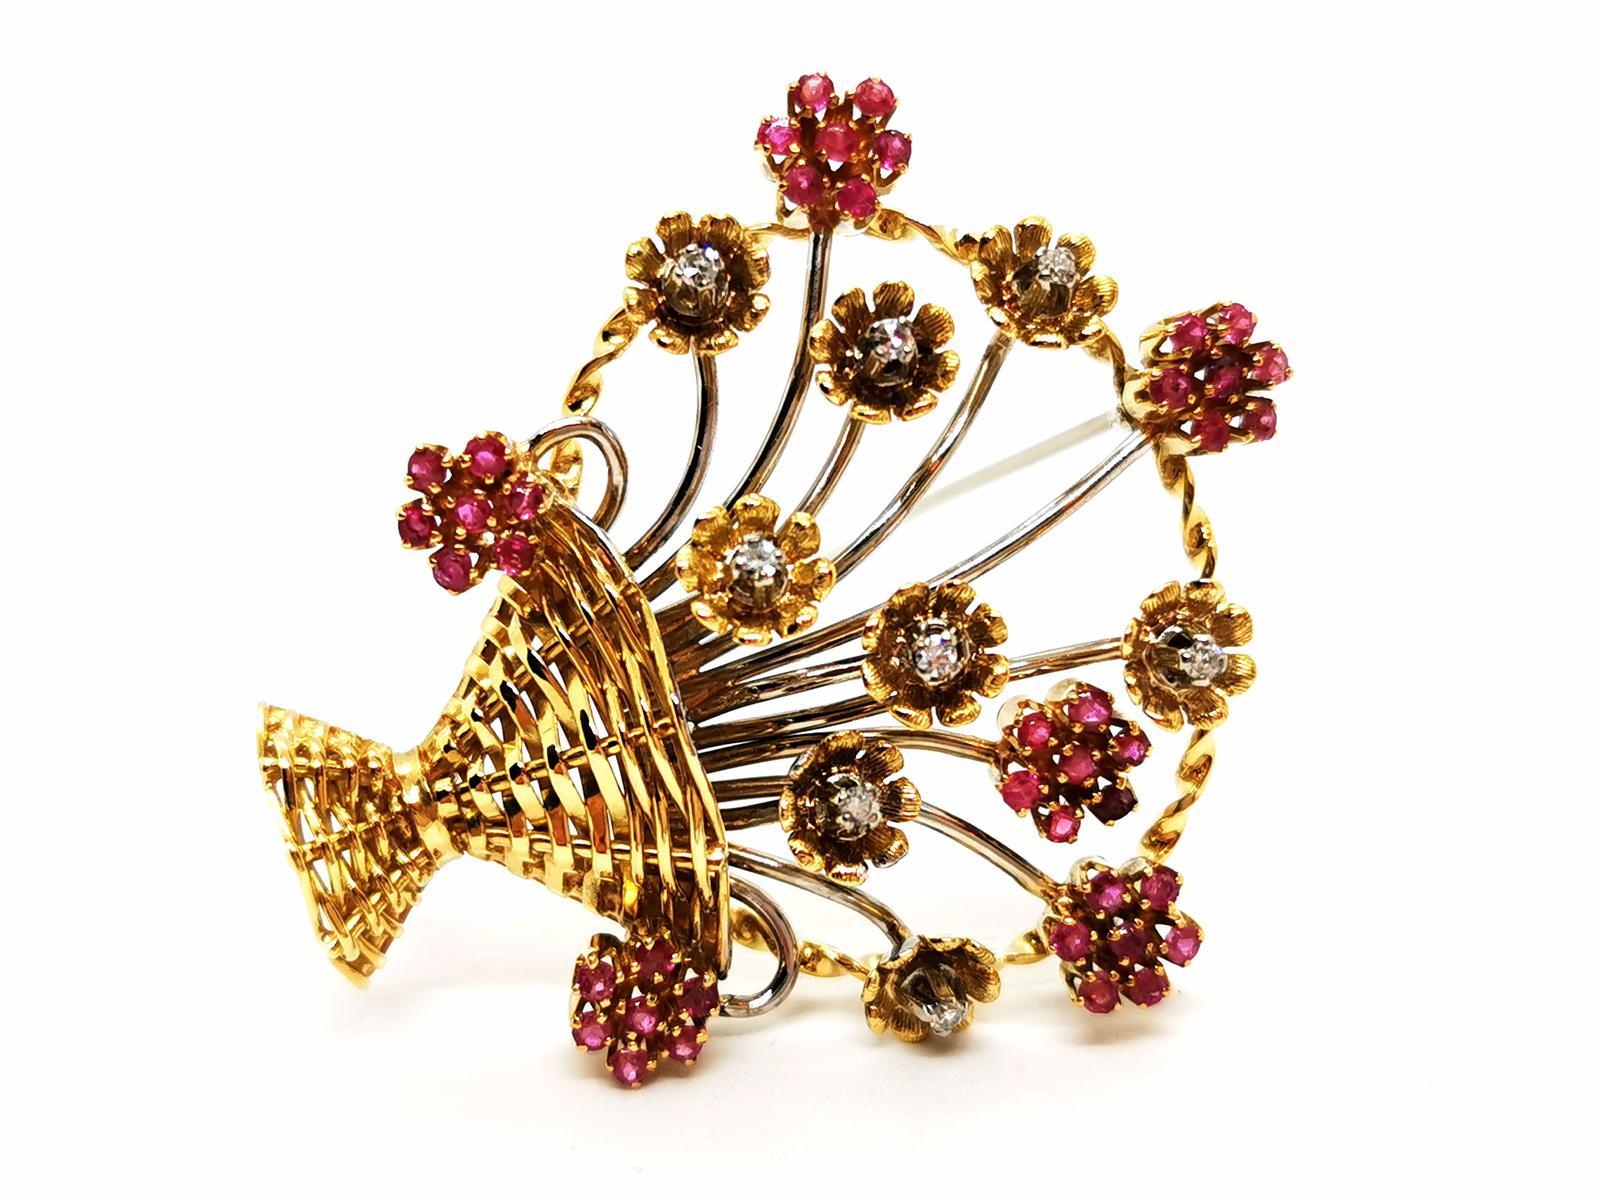 Ruby and diamond brooch. in yellow gold and white gold 750 milths (18 carats). featuring a basket of 14 flowers. set alternately. 8 brilliant diamonds. of about 0.015ct each. and 42 pink rubies. brilliant cut. of about 0.01ct each. total weight